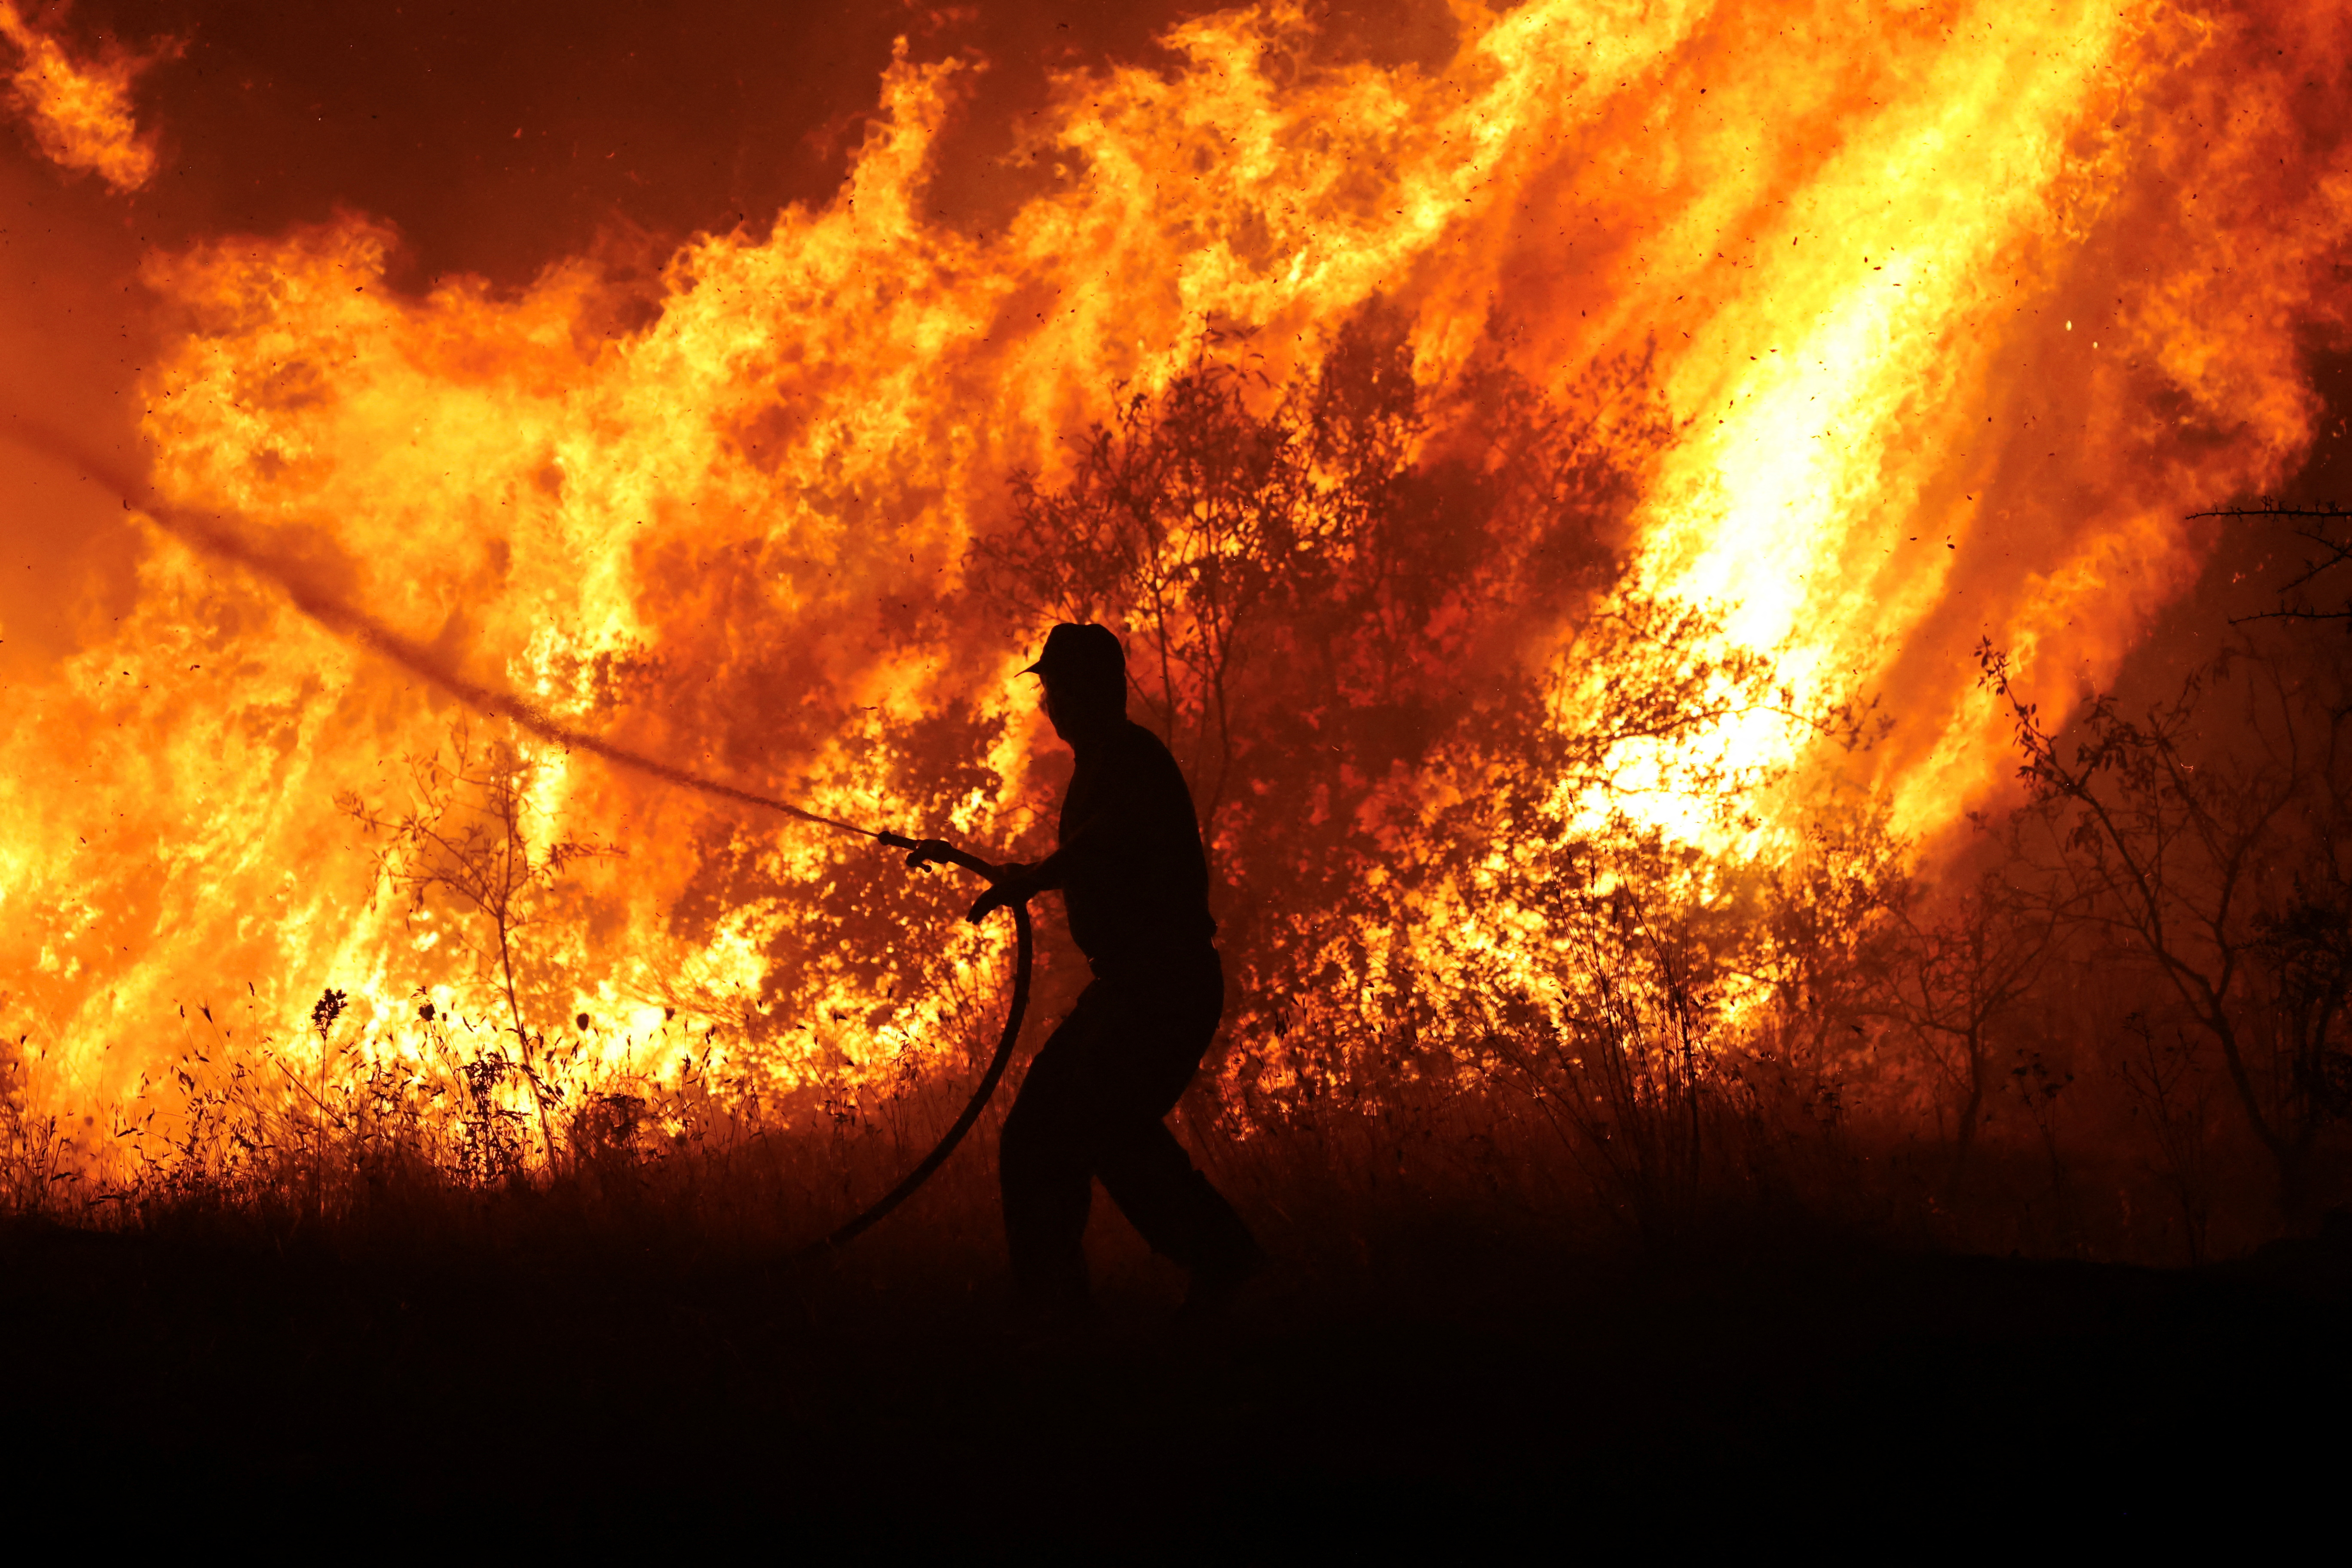 The burning truth: Arson, misinformation, and the facts about climate change and wildfires in Greece